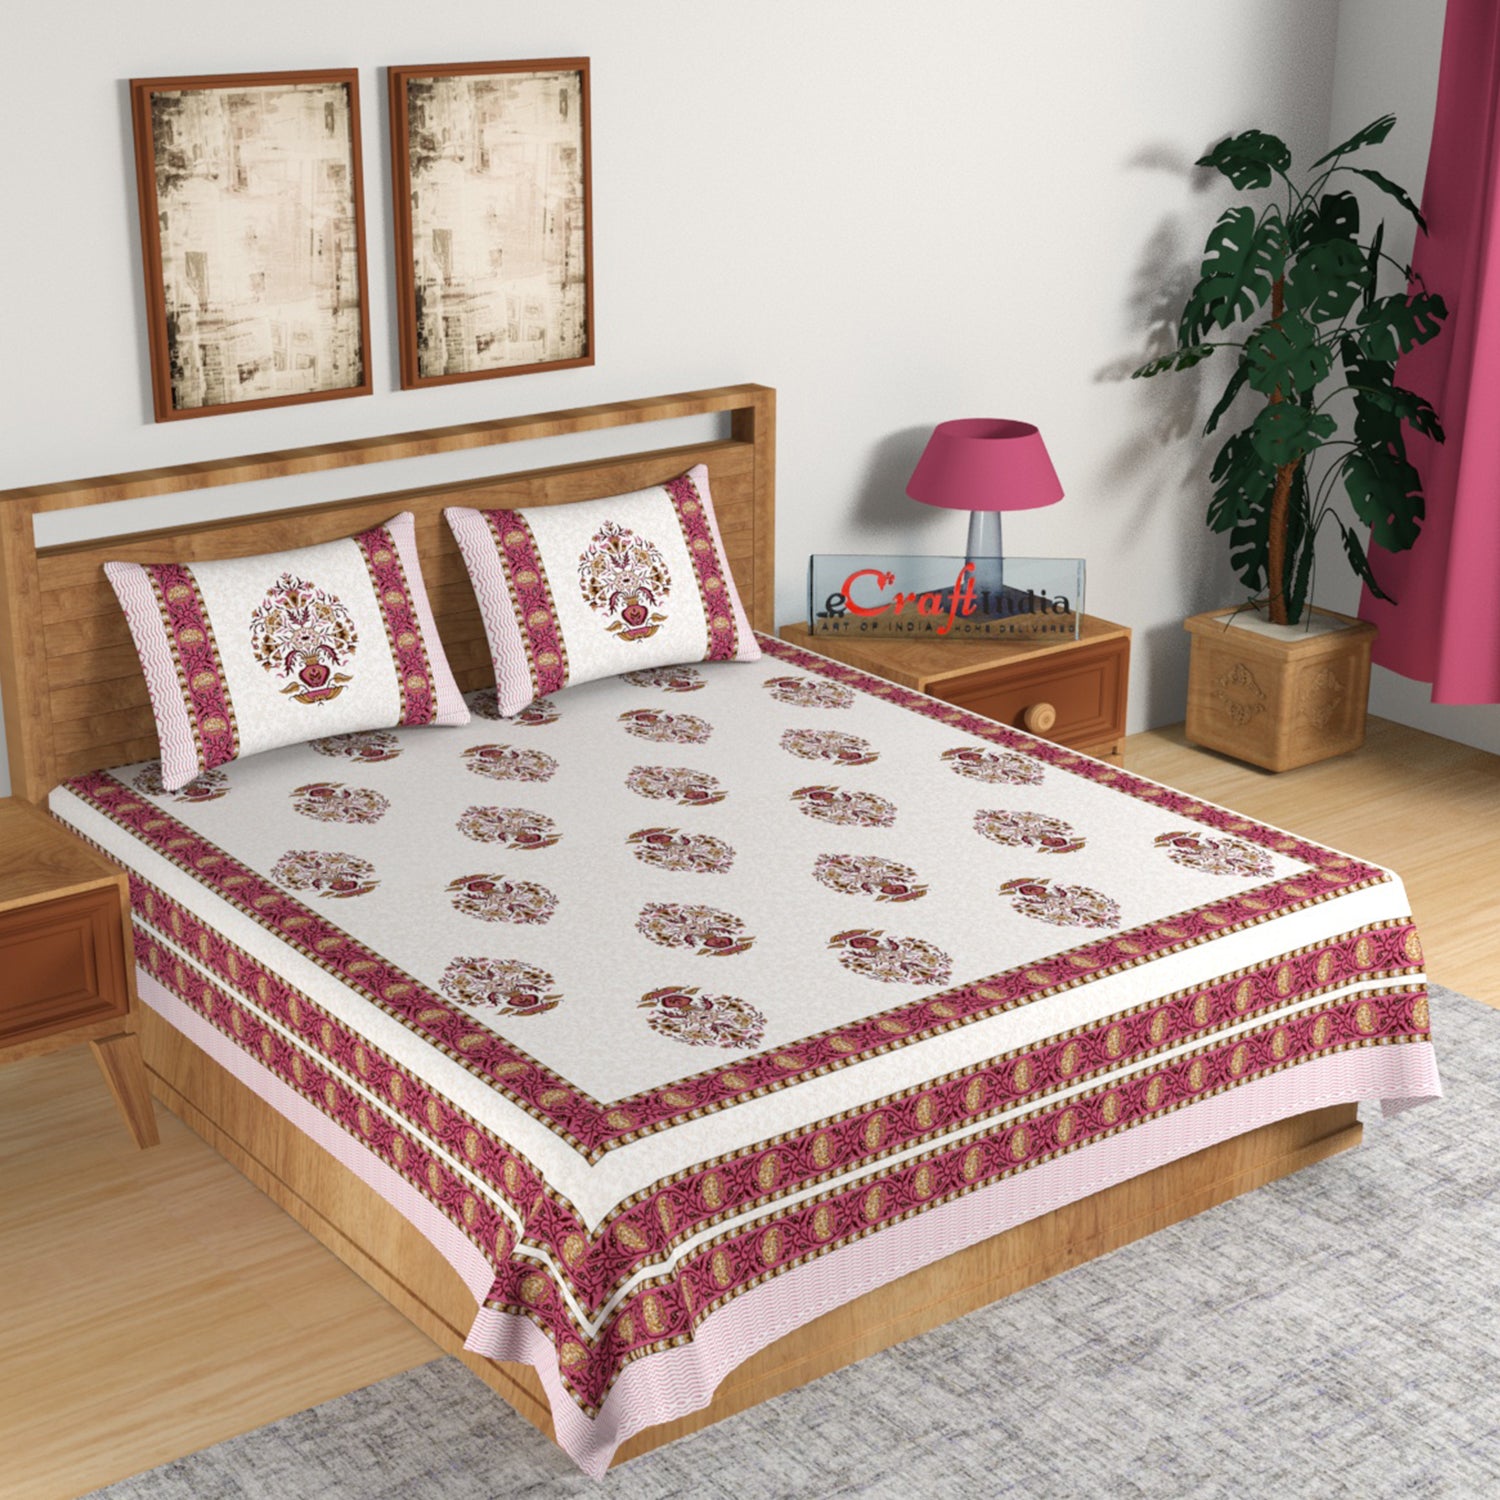 180 TC Pure Cotton Premium Ethnic Jaipuri Floral Print King Size Double Bed Bedsheet (108 In x 108 In) with 2 pillow cover - Pink